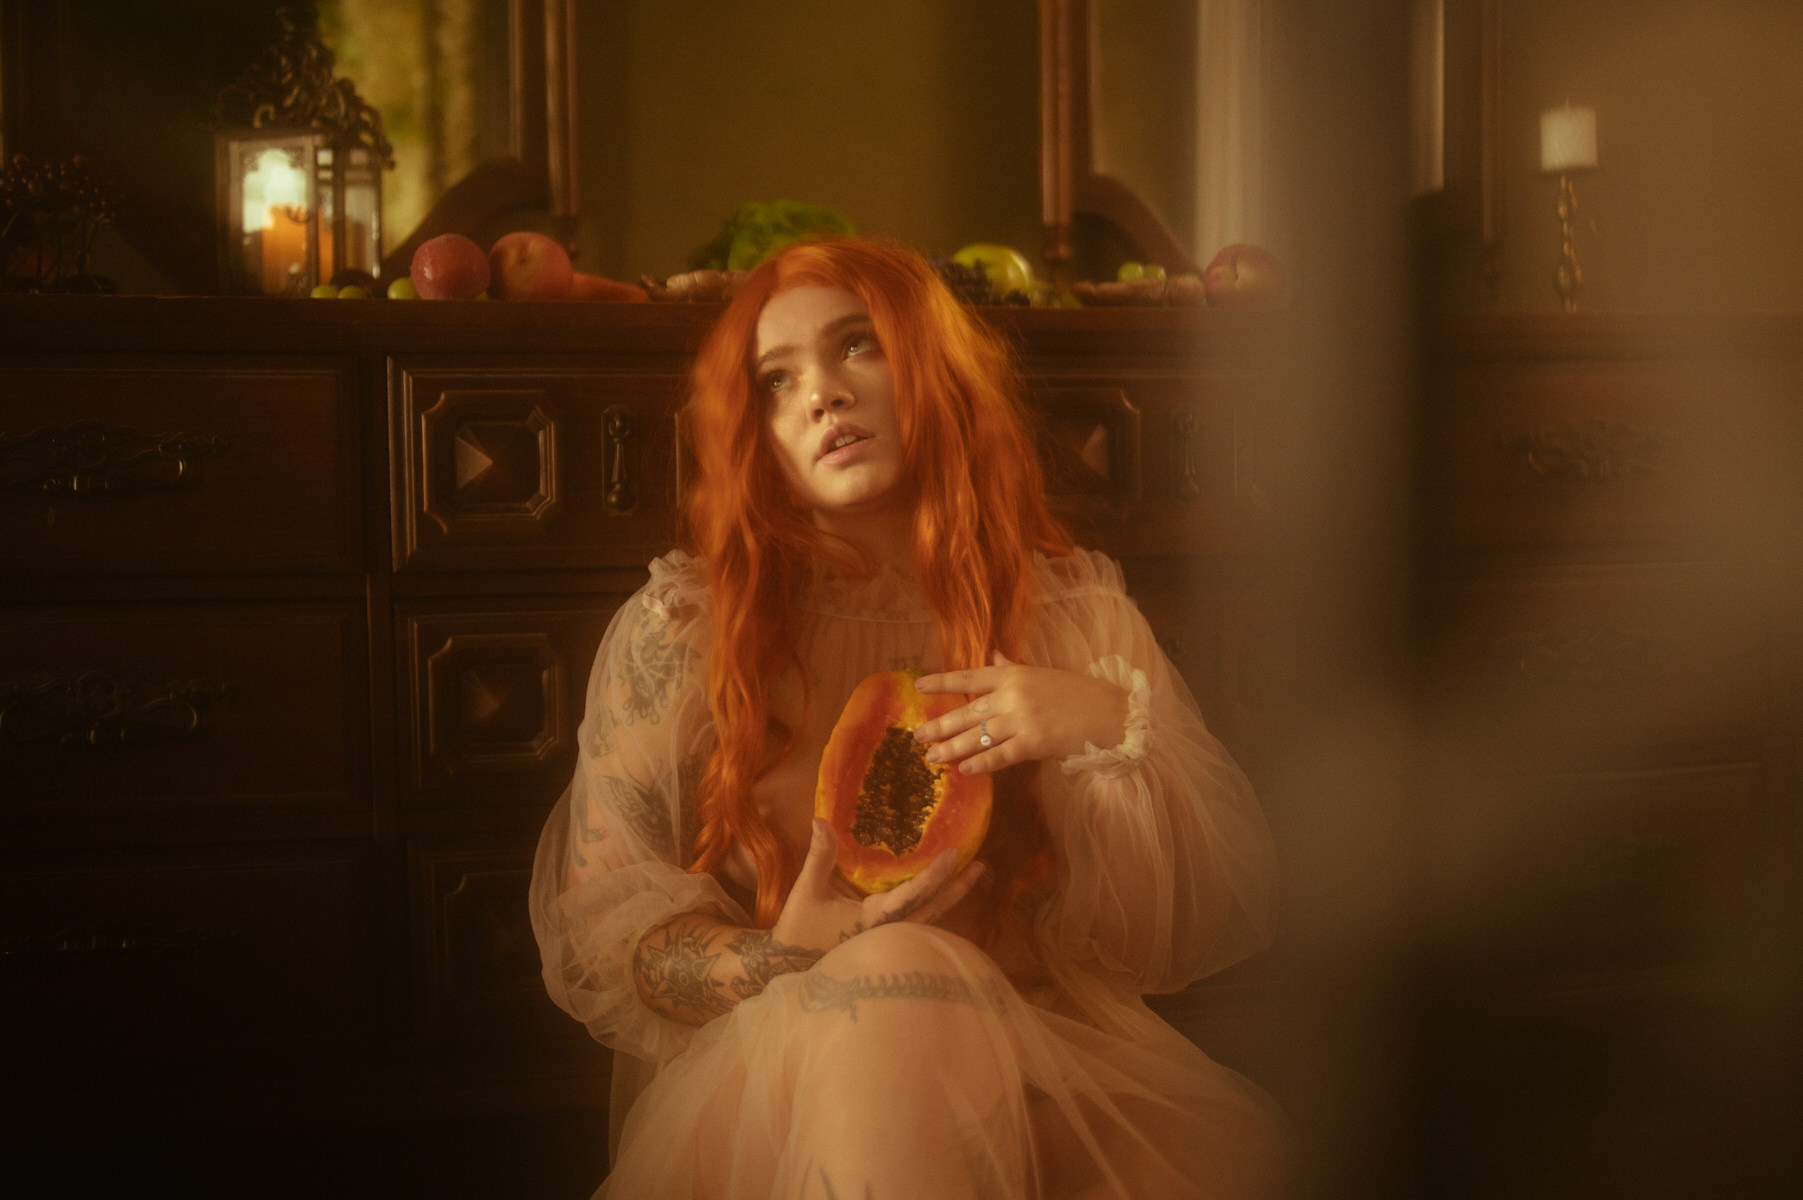 A woman with red hair sitting in a room surrounded by fruit during a boudoir portraits session.